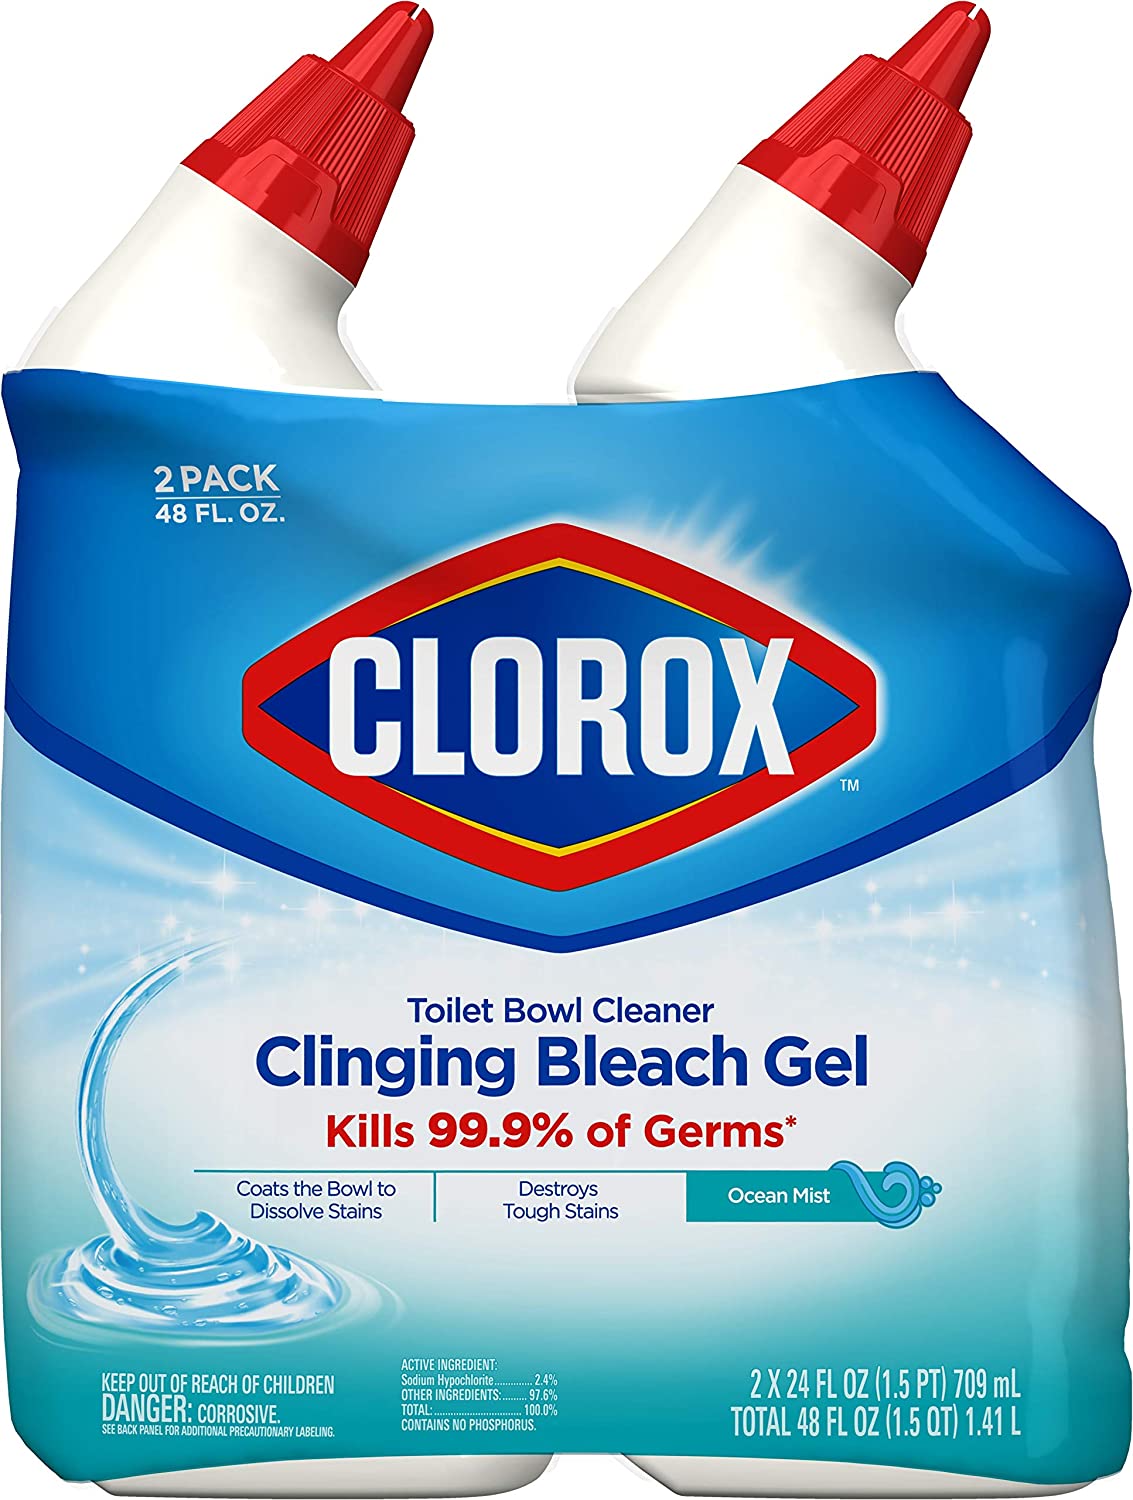 2-Pack 24-Oz Clorox Toilet Bowl Cleaner Clinging Bleach Gel (Ocean Mist) $3.45 w/ S&S + Free Shipping w/ Prime or on orders over $25